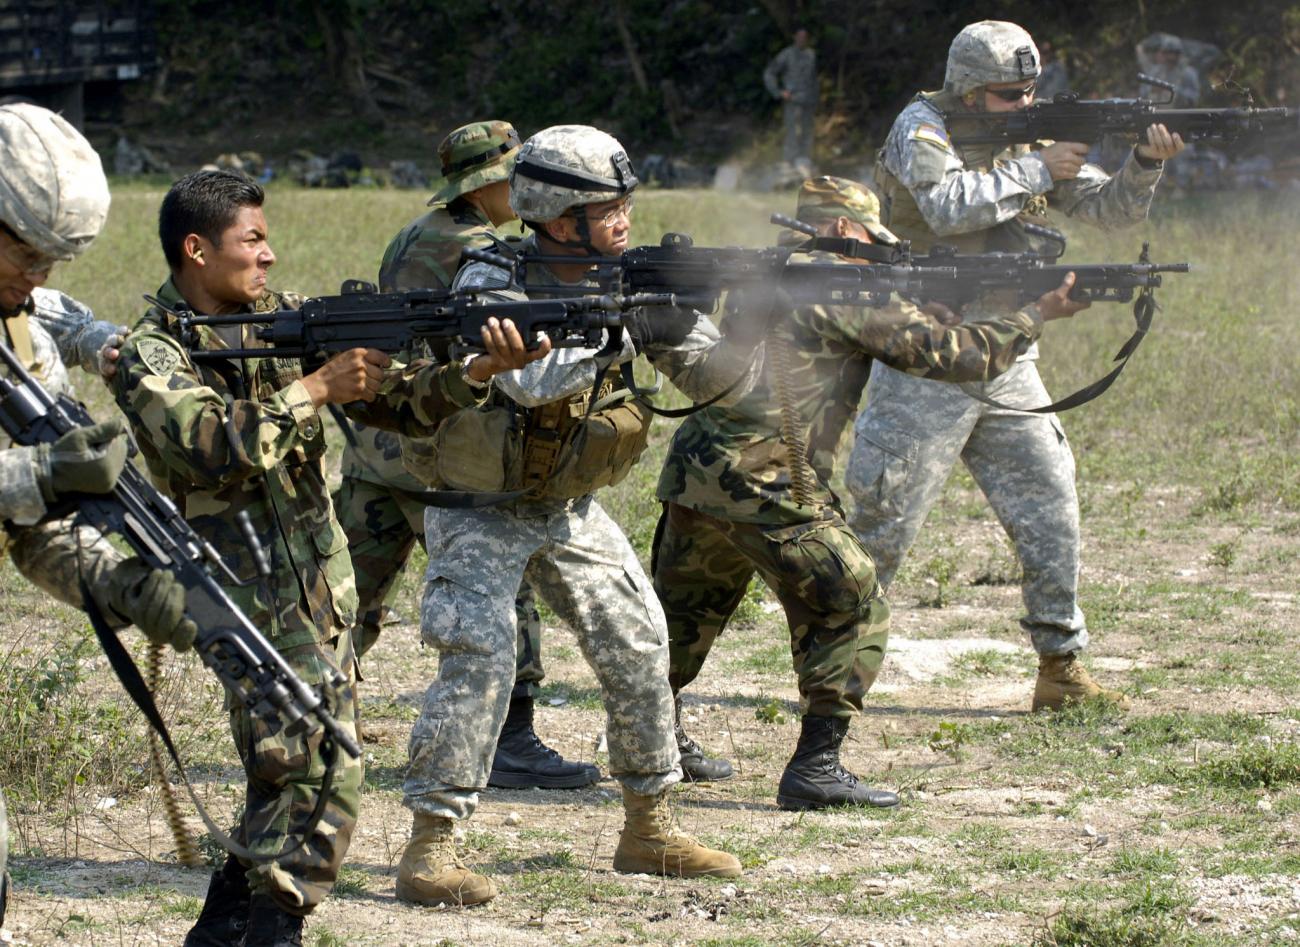 Soldiers from the USA and Mexico stand in a line, firing machine guns